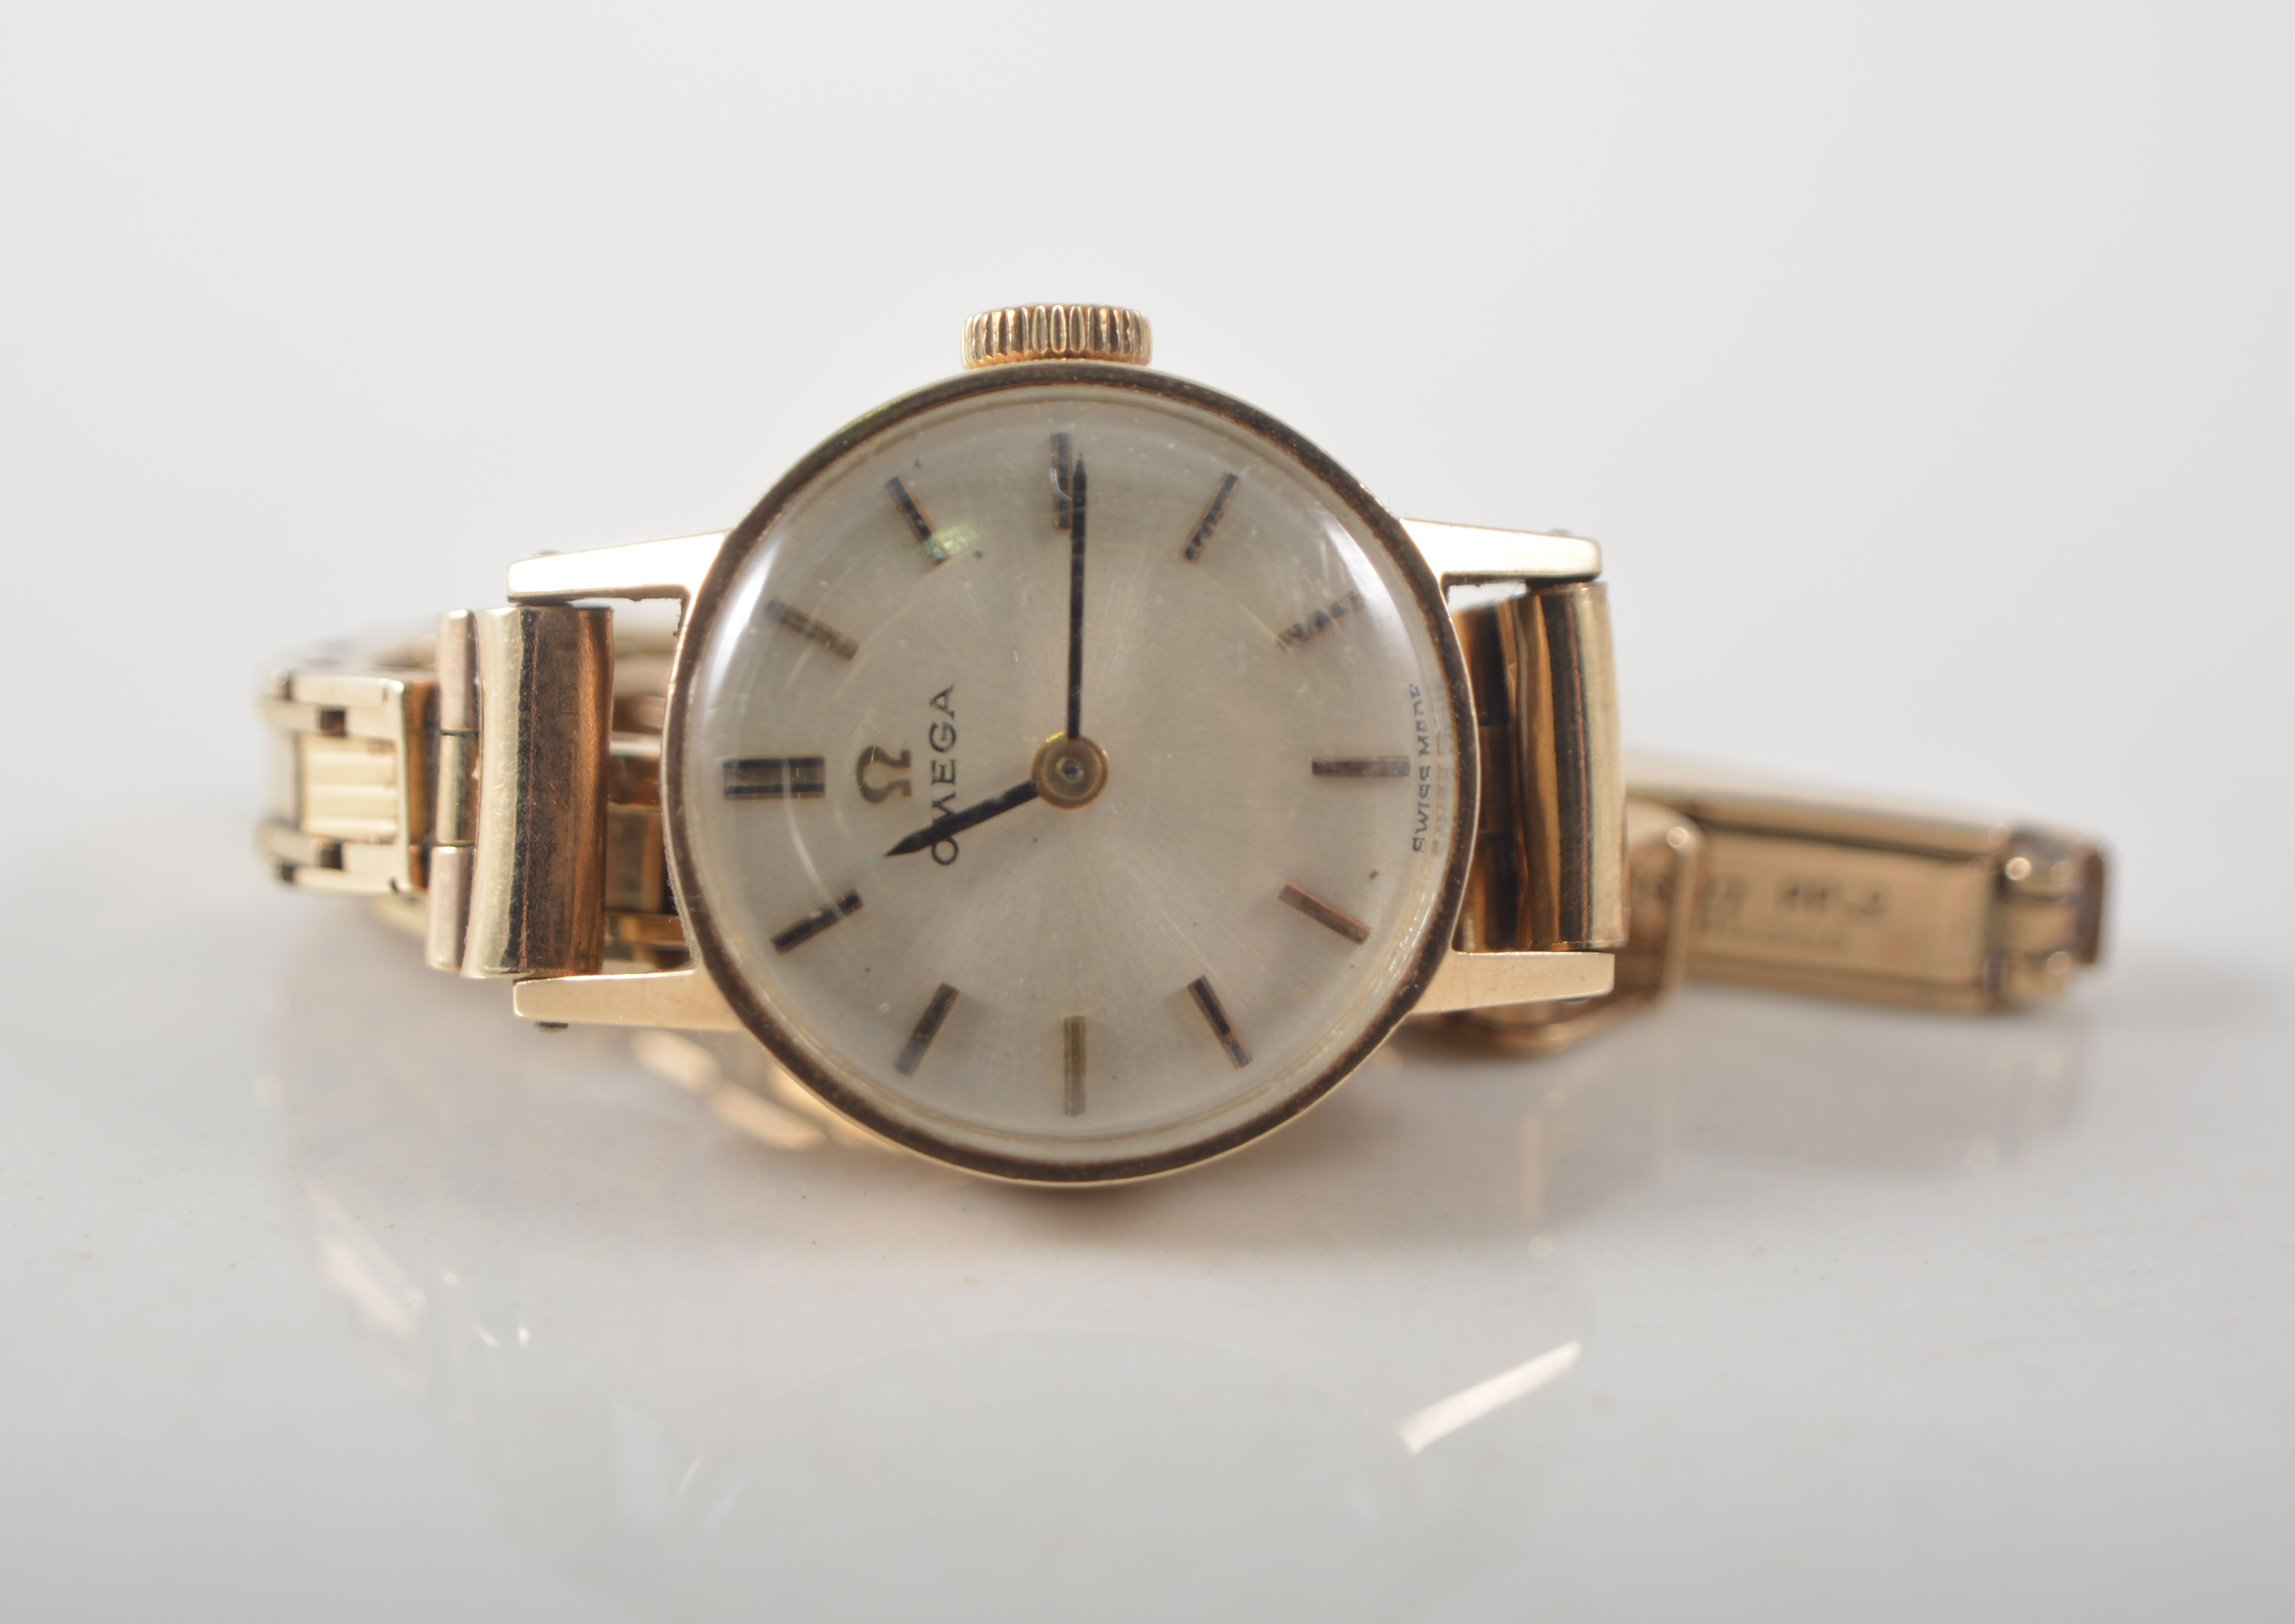 Ladies Omega wristwatch, circular dial with baton markers, 9ct gold case and bracelet strap.